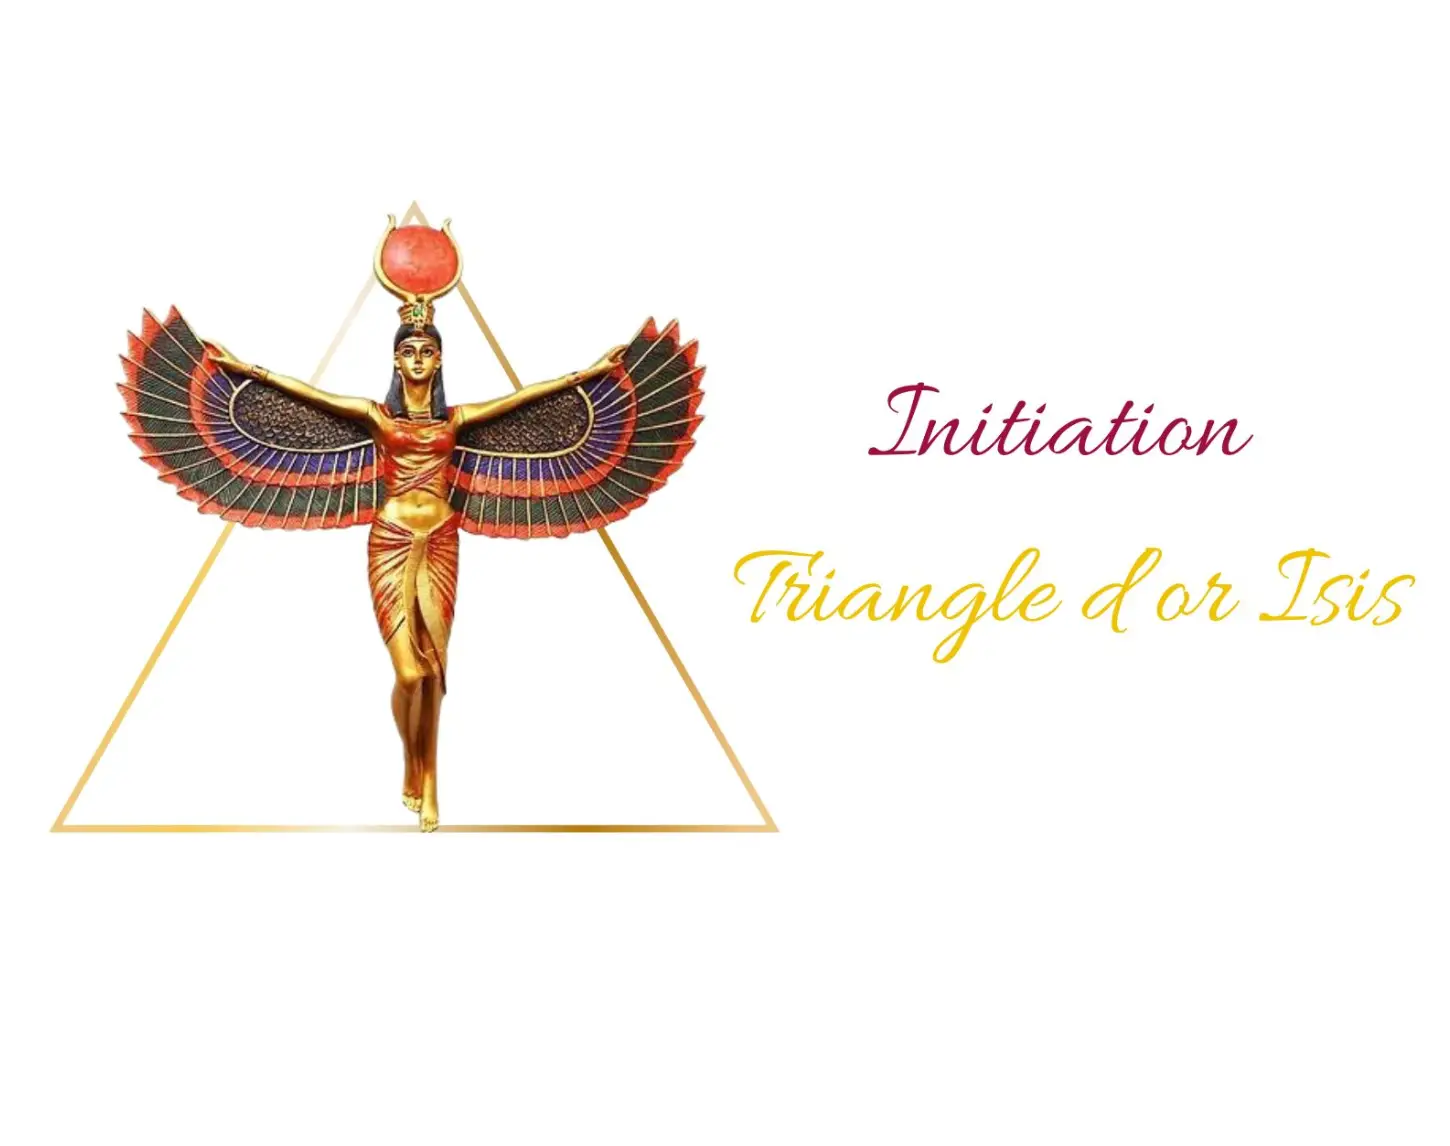 Initiation Triangle d'or d'isis Mel'Organiser